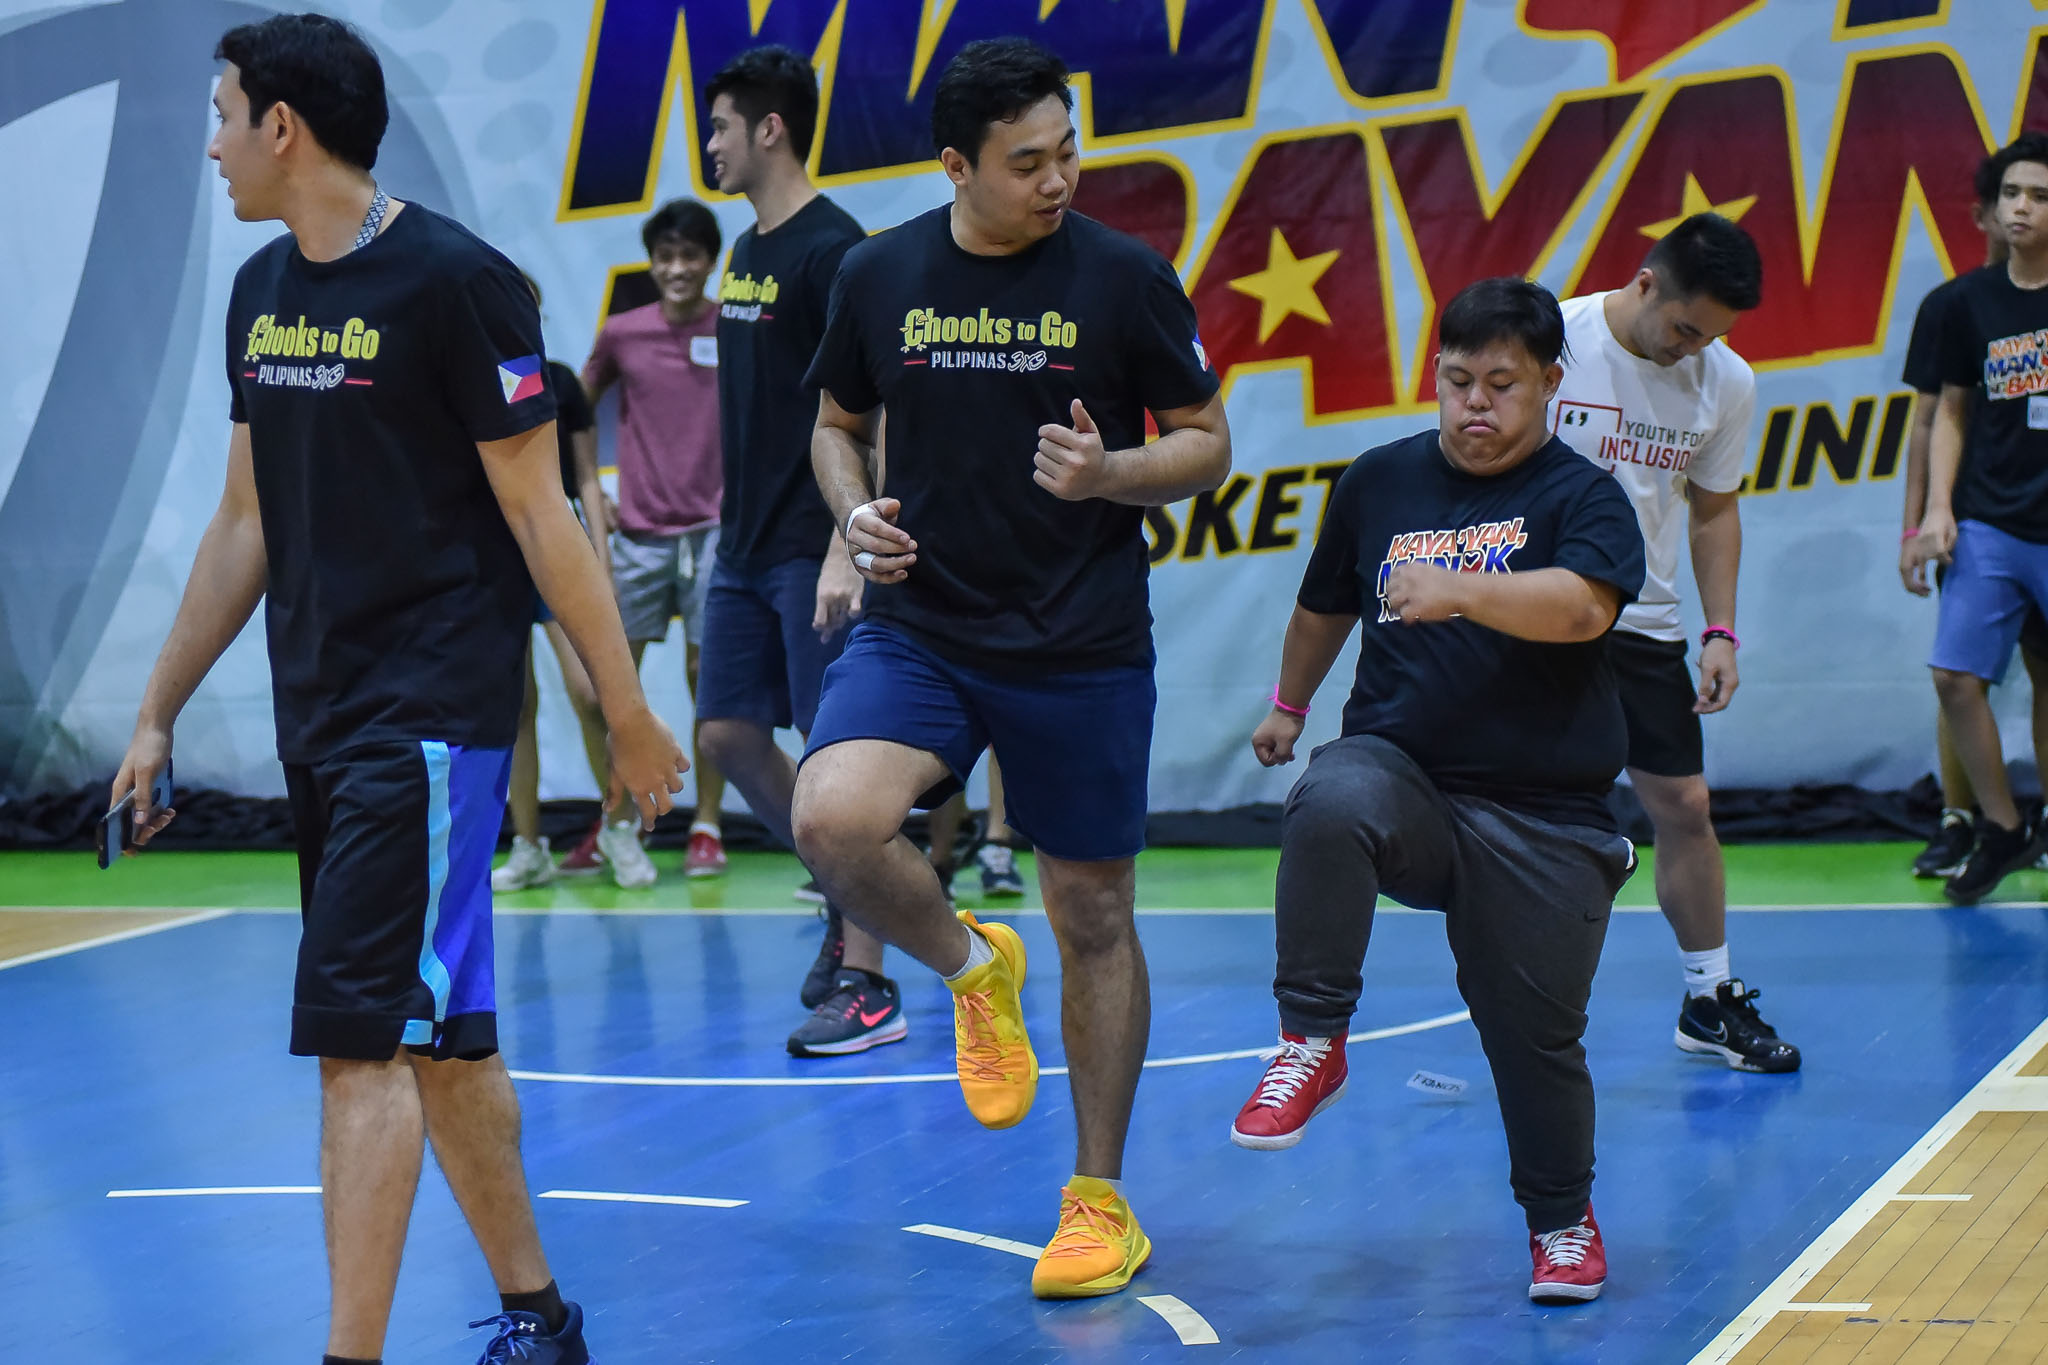 Unified-Basketball-Clinic-Alvin-Pasaol Chooks 3X3 NT pool take part in basketball clinic for PIDs 3x3 Basketball Chooks-to-Go Pilipinas 3x3 News  - philippine sports news